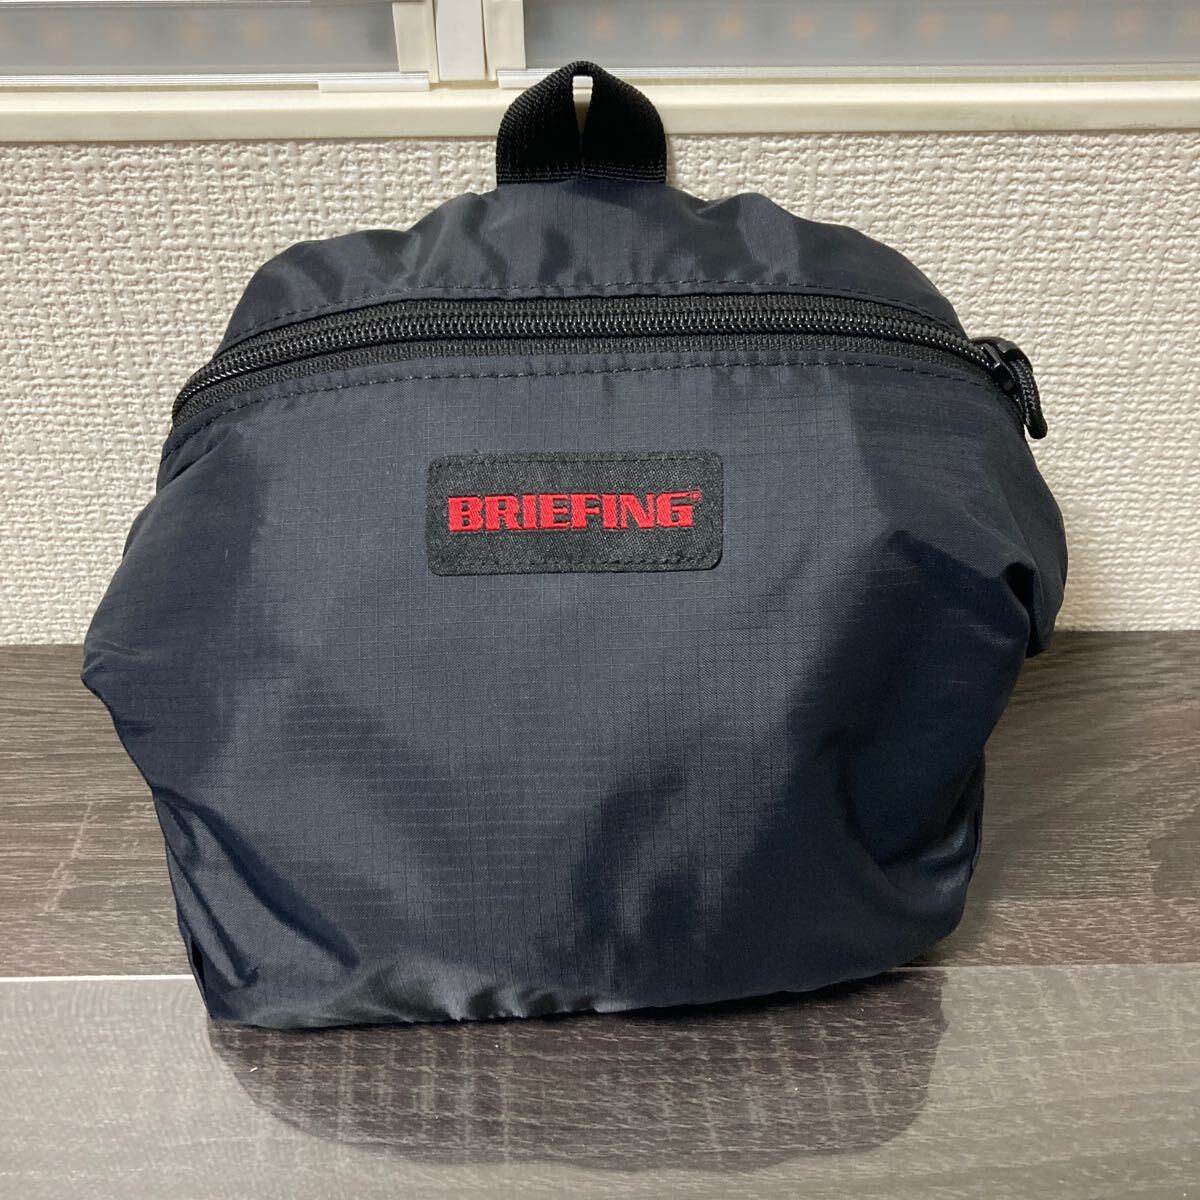 ★BRIEFINGブリーフィングパッカブルデイパックPACKABLE DAY PACK ブラック 黒 MADE IN USA 未使用保管品★